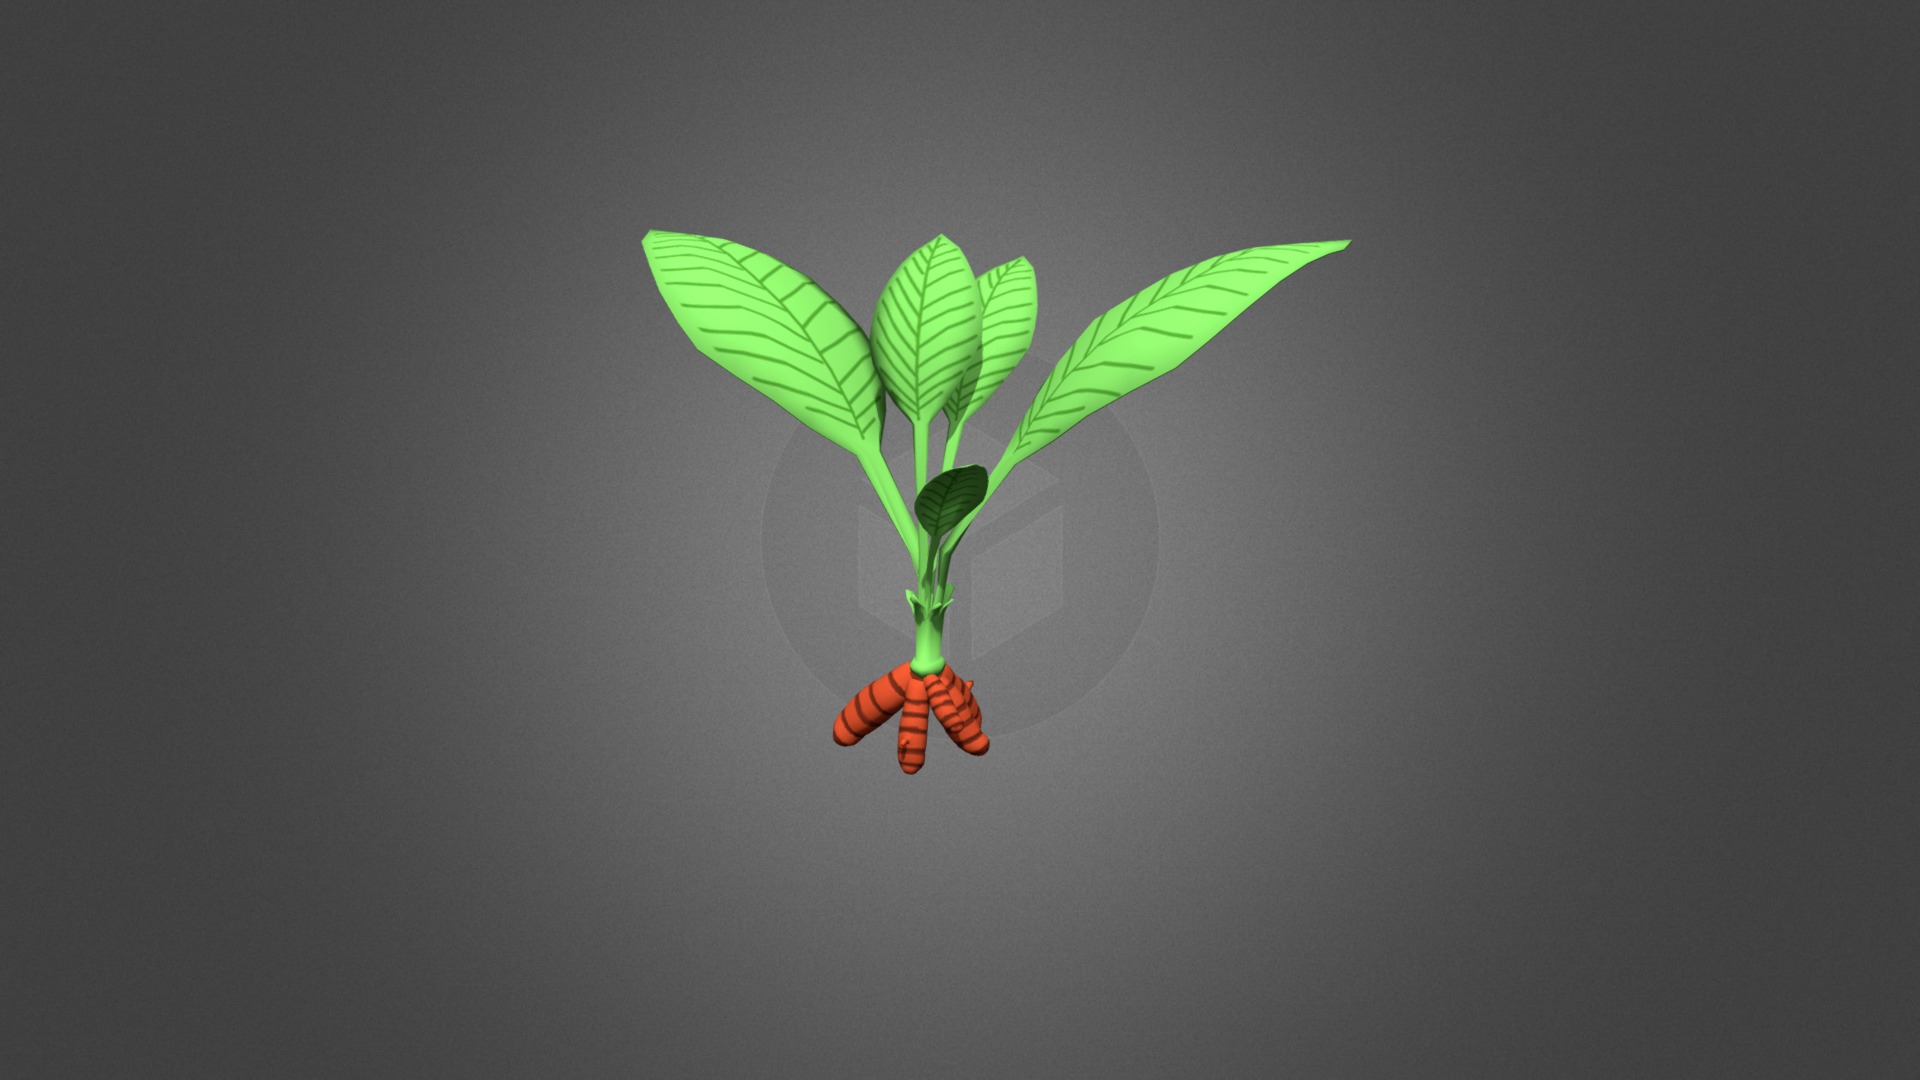 3D model Turmeric – Curcuma longa - This is a 3D model of the Turmeric - Curcuma longa. The 3D model is about a green insect with wings.